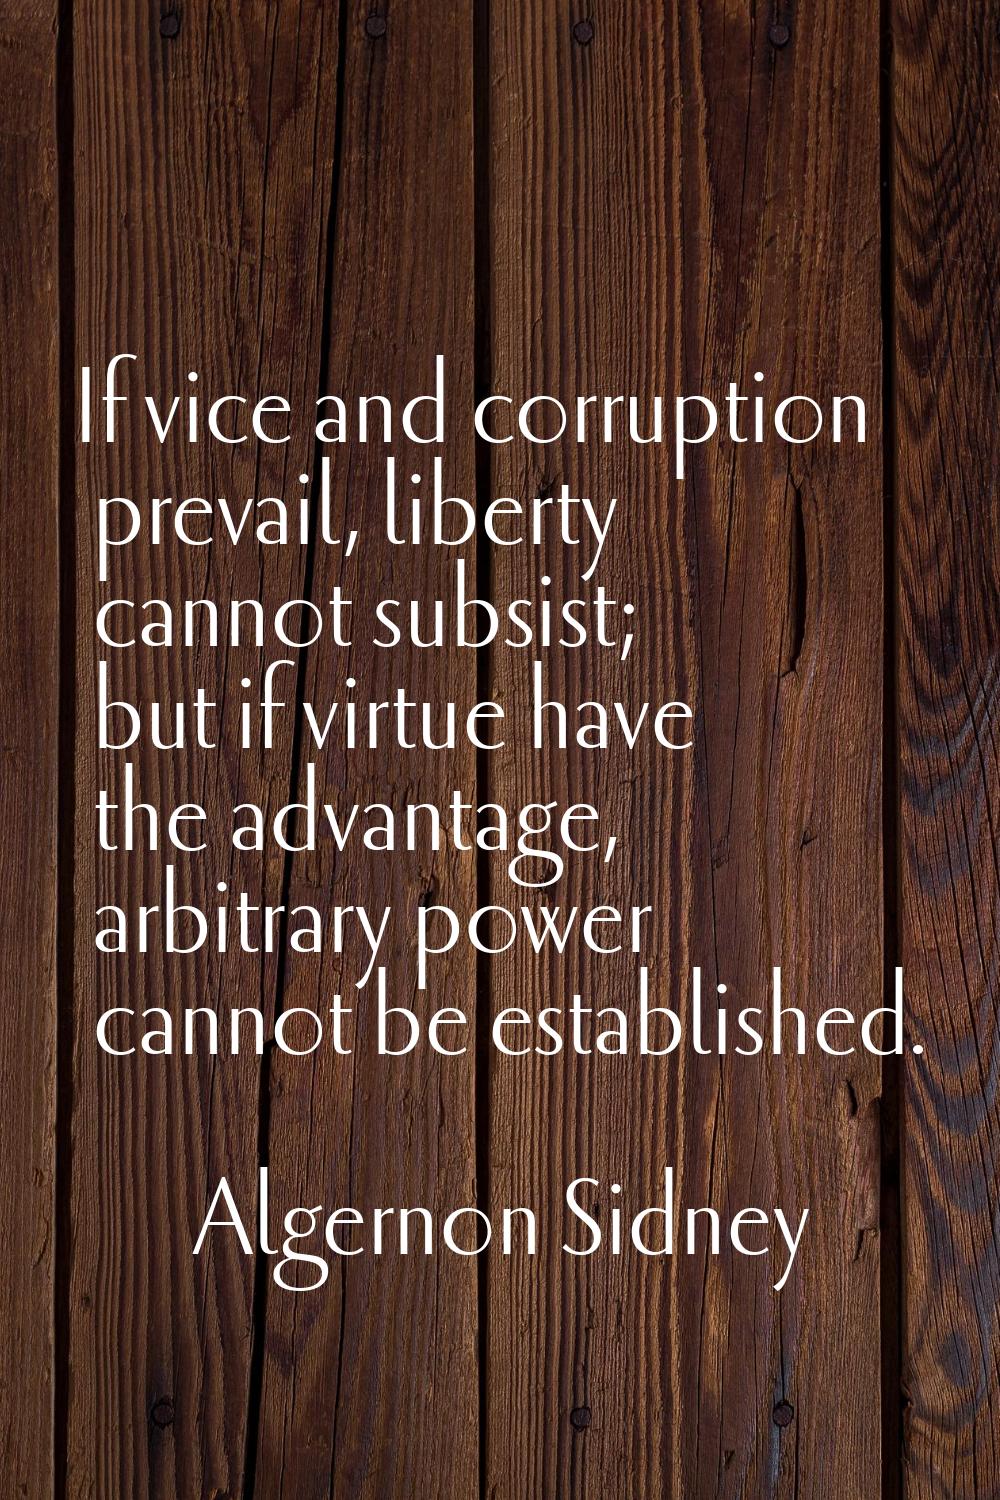 If vice and corruption prevail, liberty cannot subsist; but if virtue have the advantage, arbitrary